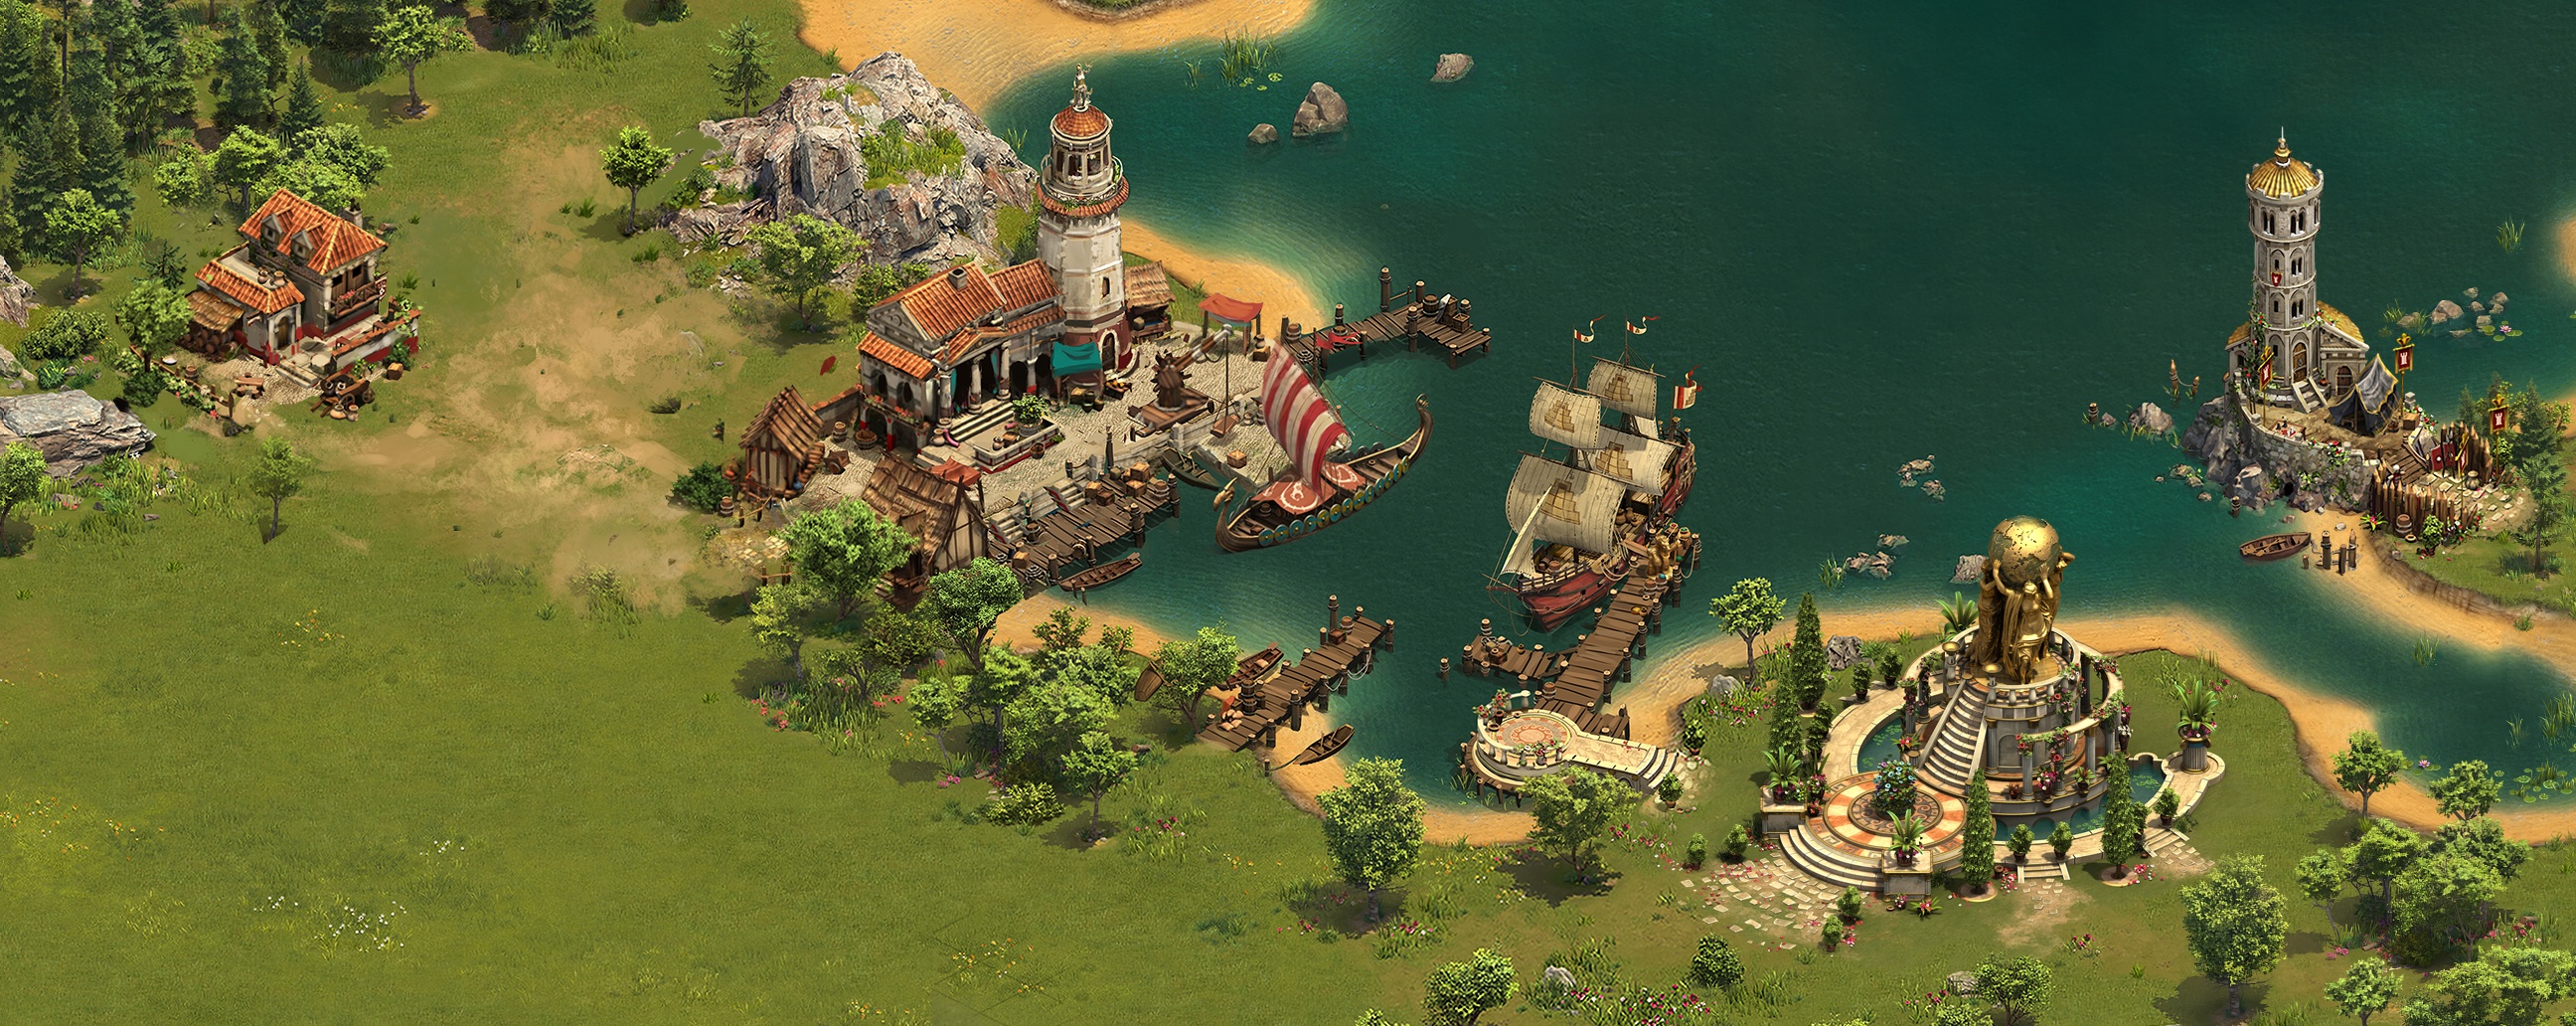 forge of empires iron age battle strategy